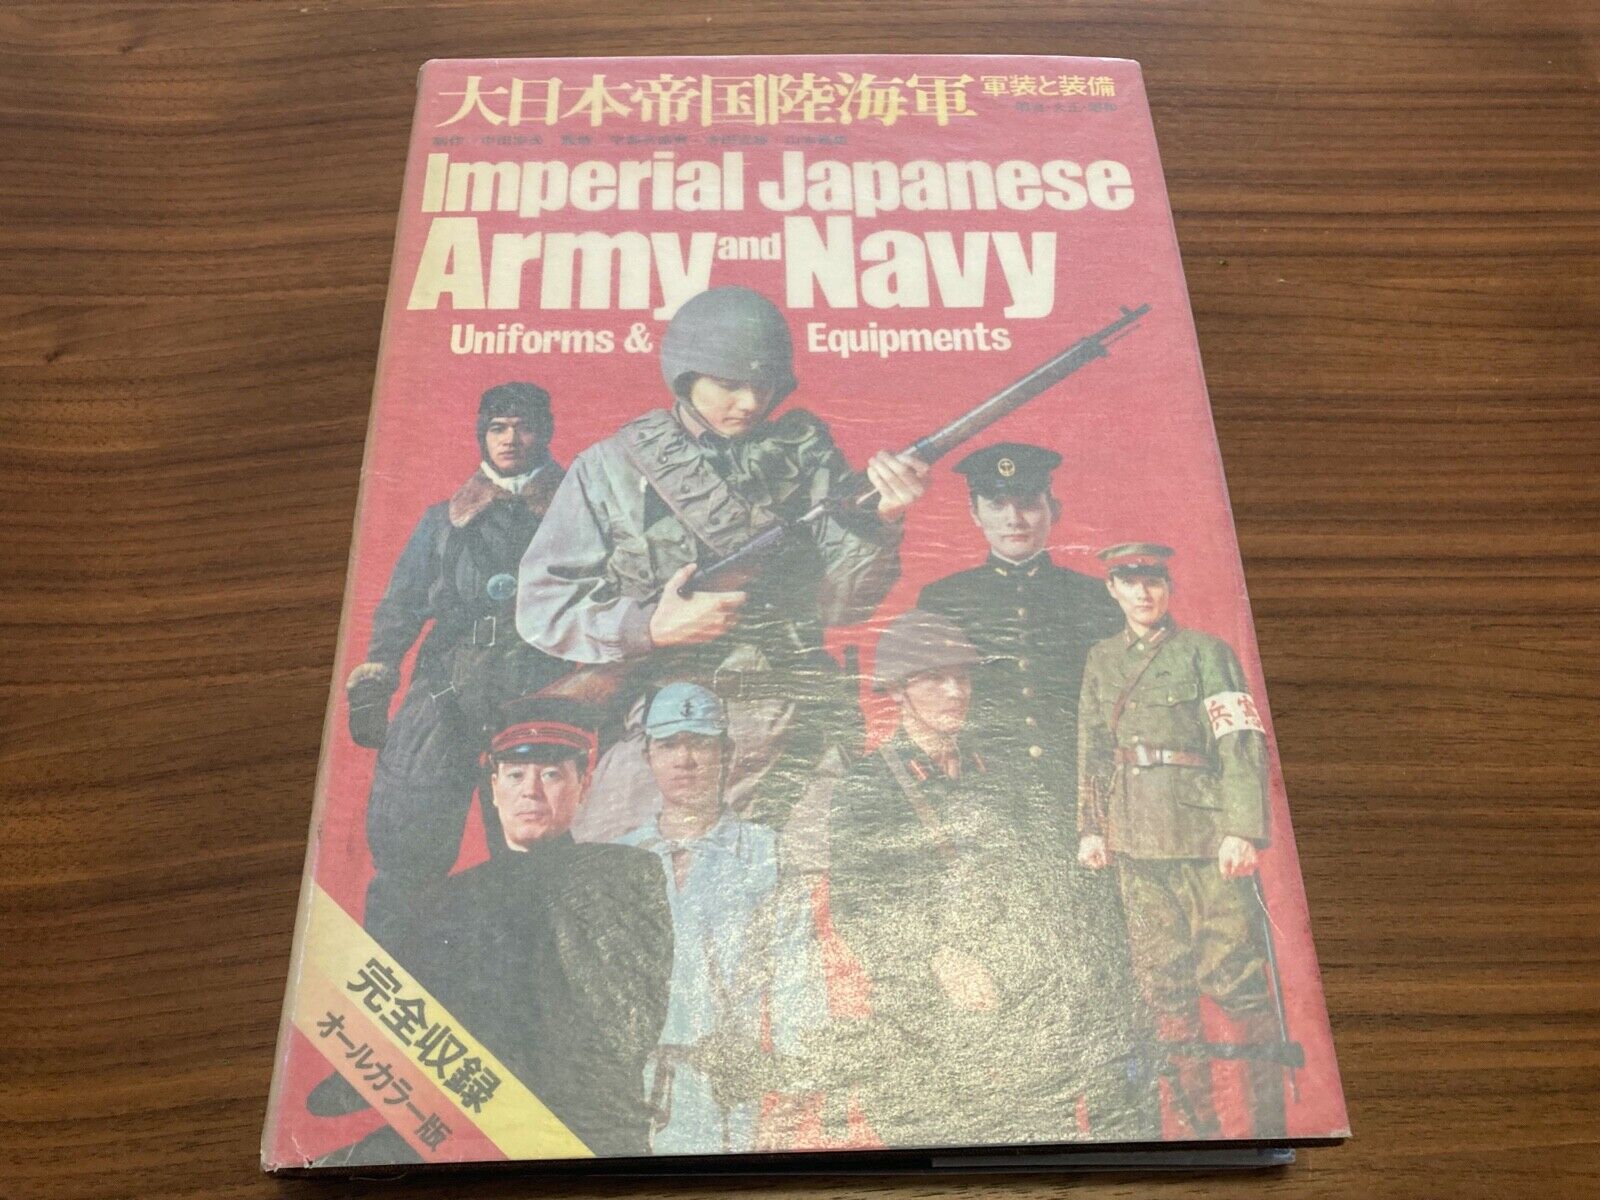 The Imperial Japanese Army and Navy - military uniforms and equipment